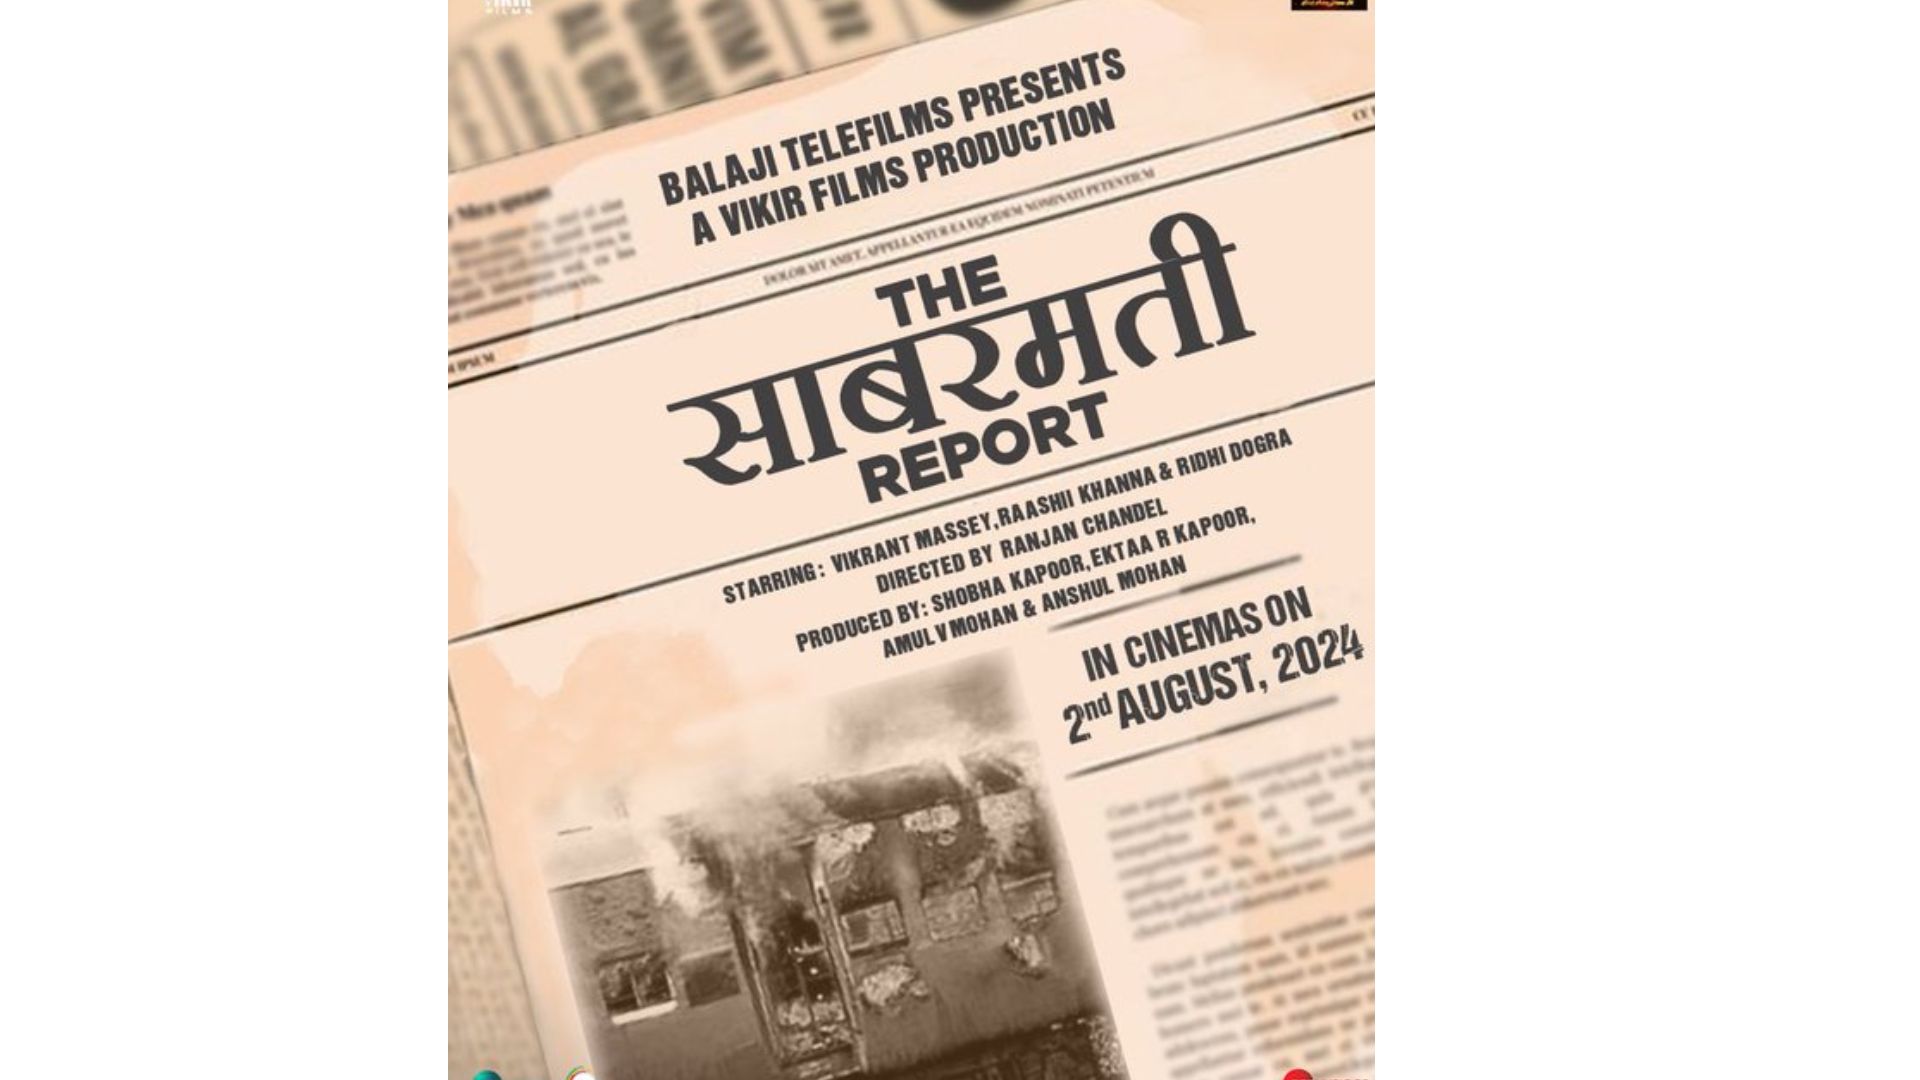 The Sabarmati Report Update: The Sabarmati Report has officially announced the date for the theatrical release.